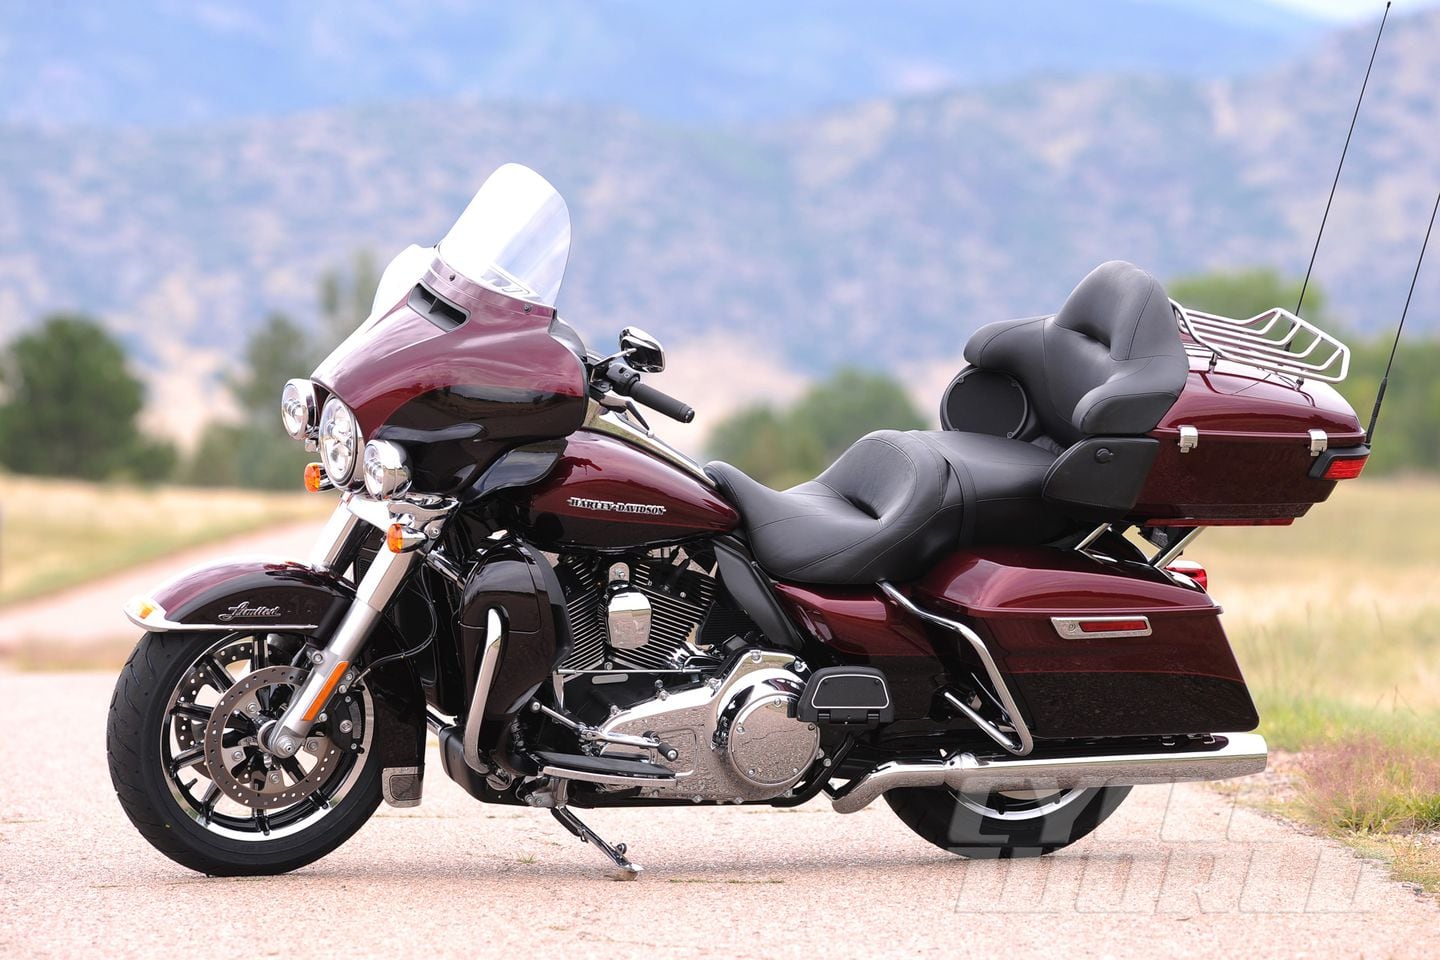 2014 Harley Davidson Electra Glide Ultra Limited First Ride Review Cycle World